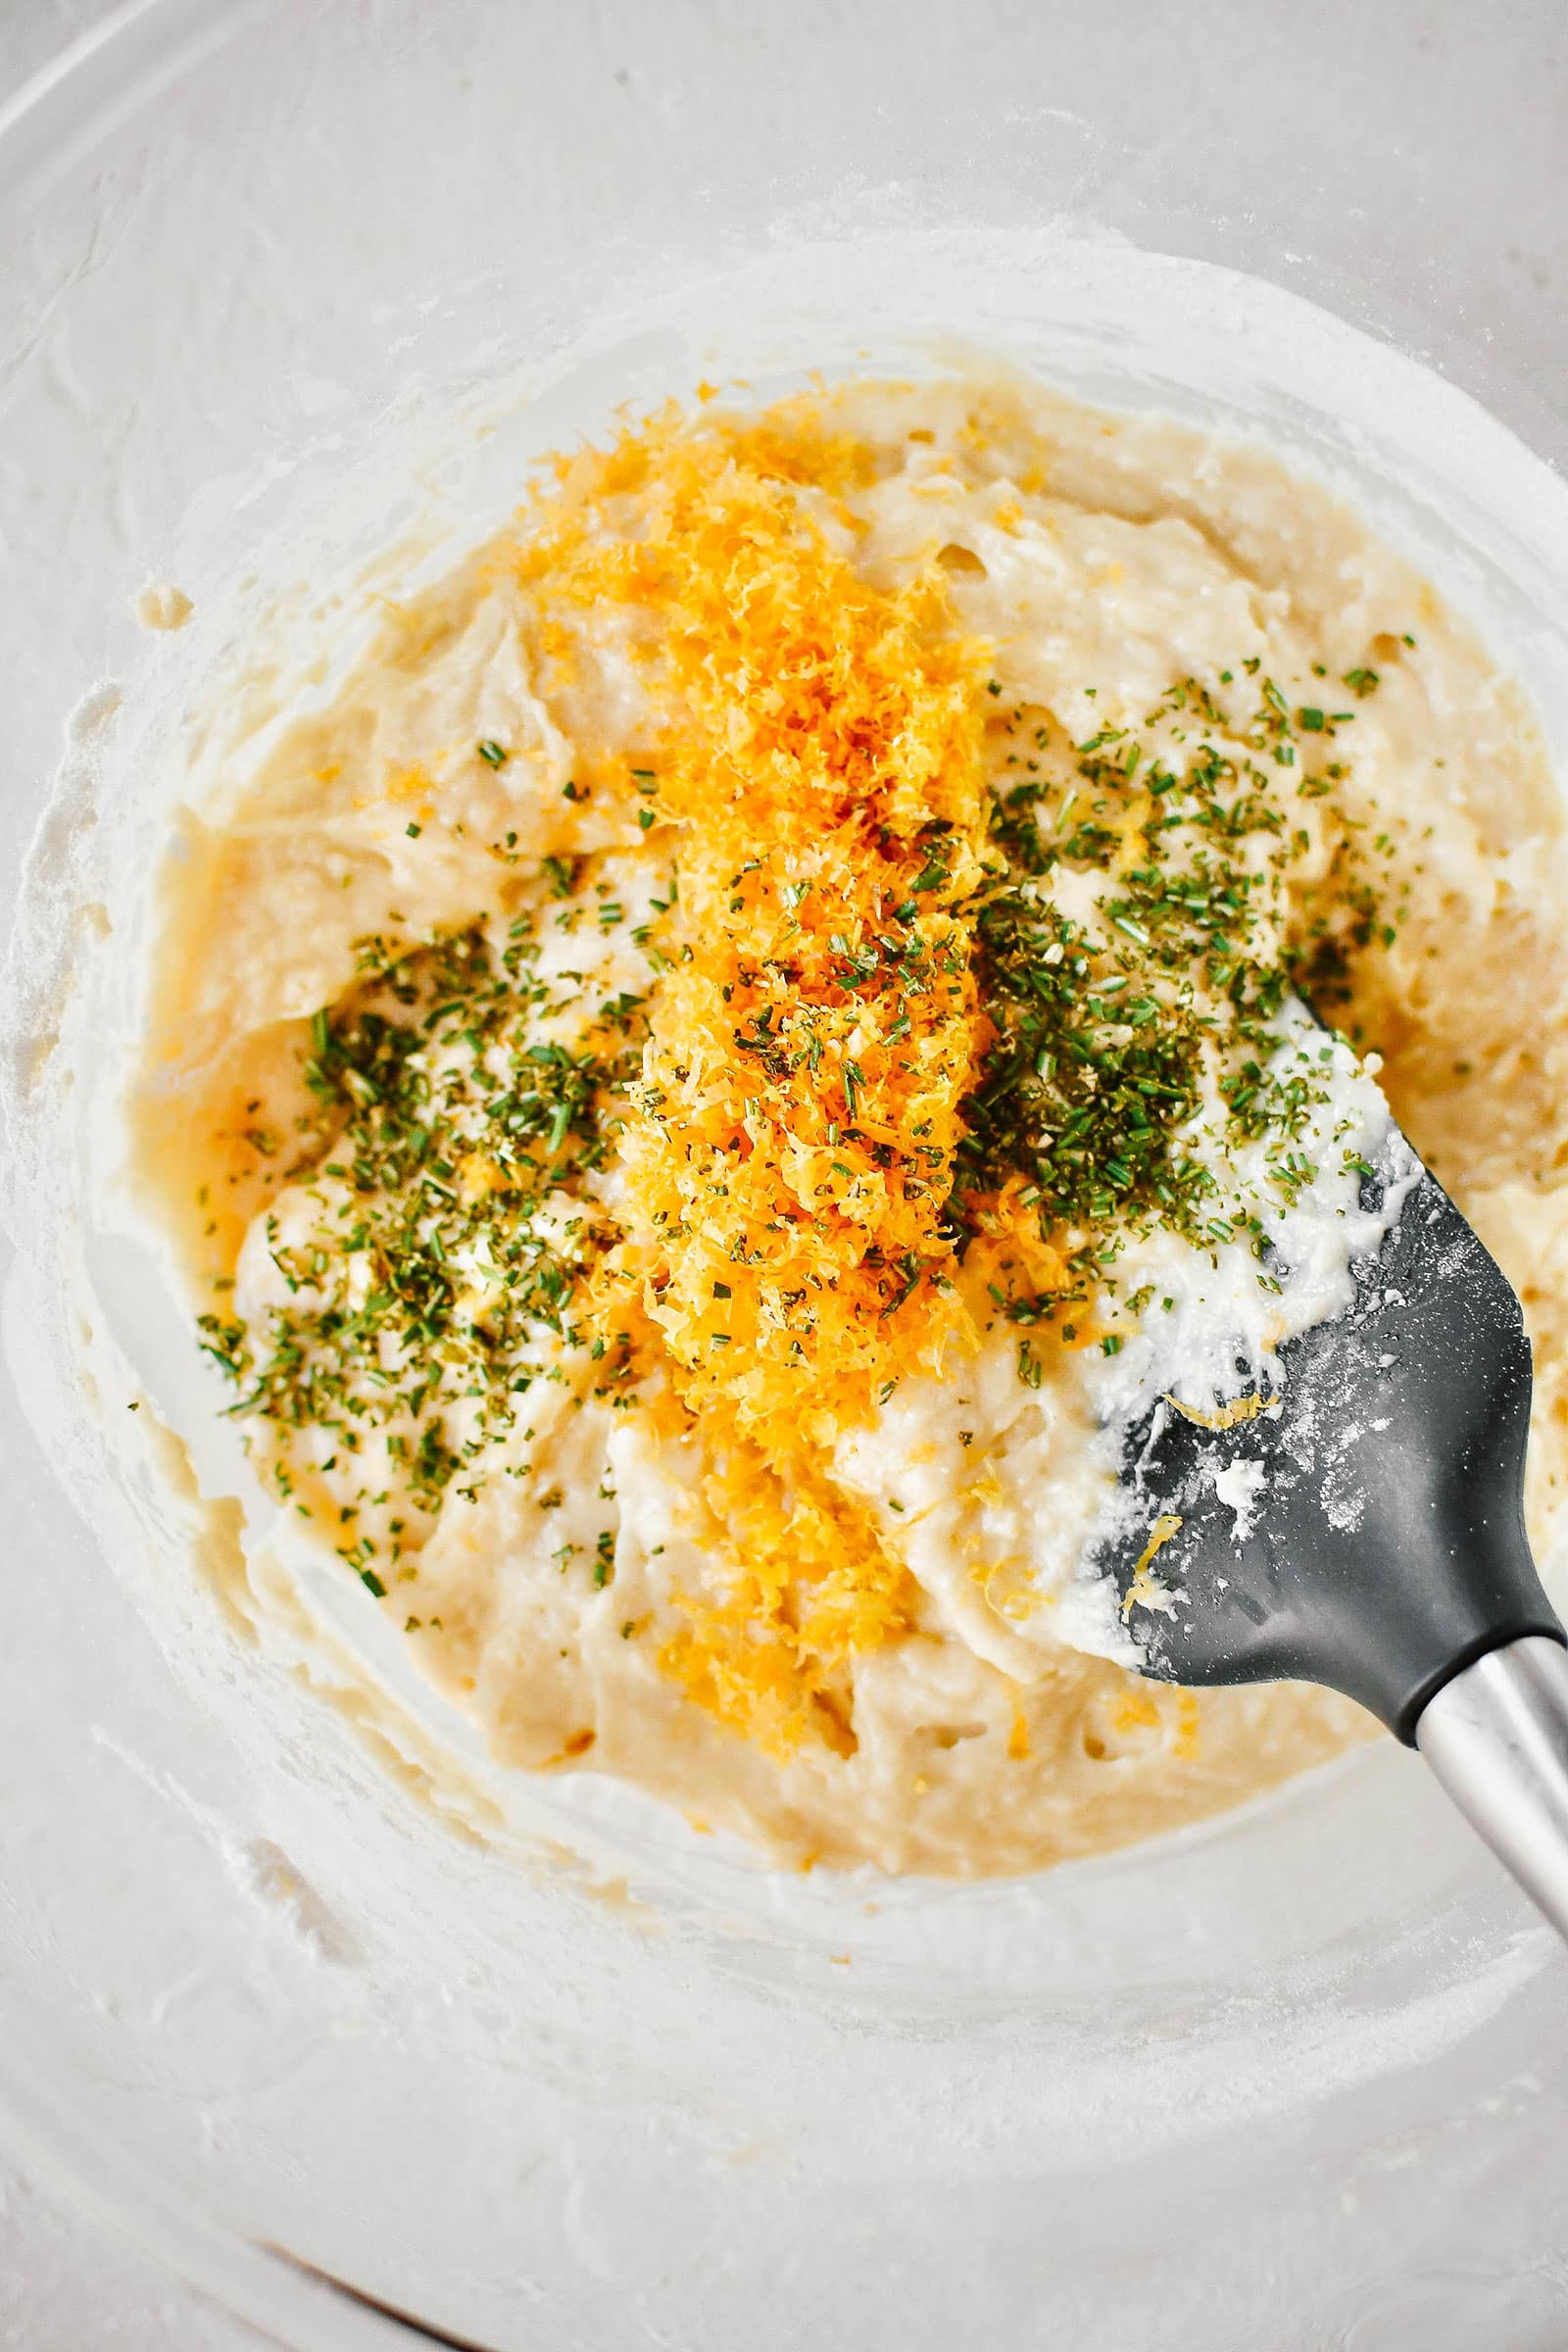 A spoon mixing grapefruit zest and rosemary into a bowl of bread batter